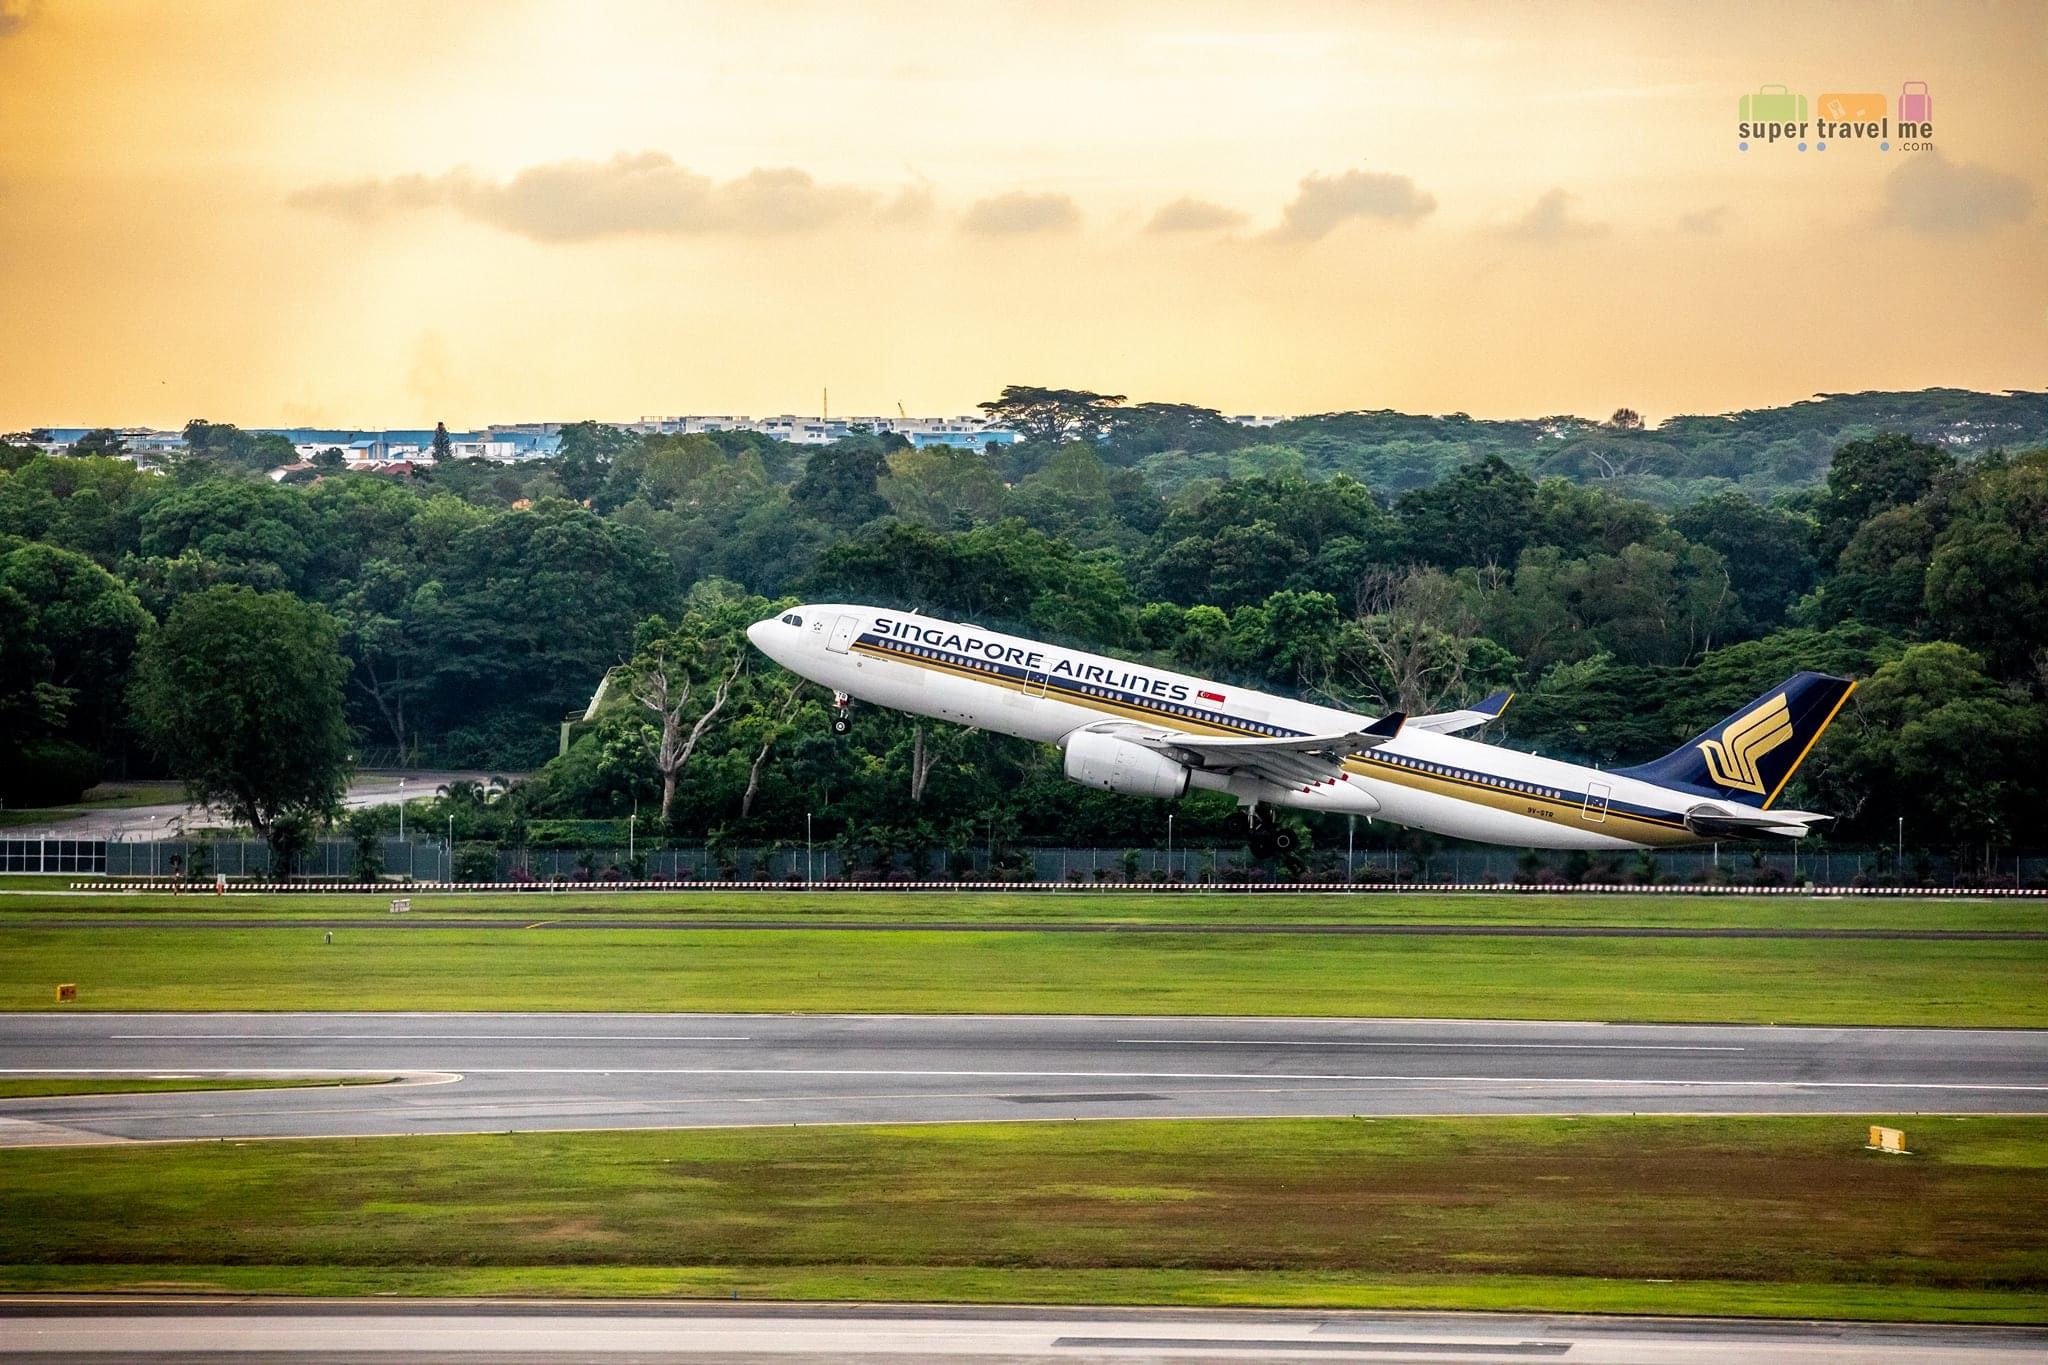 Singapore Airlines Aircraft taking off at Changi Airport